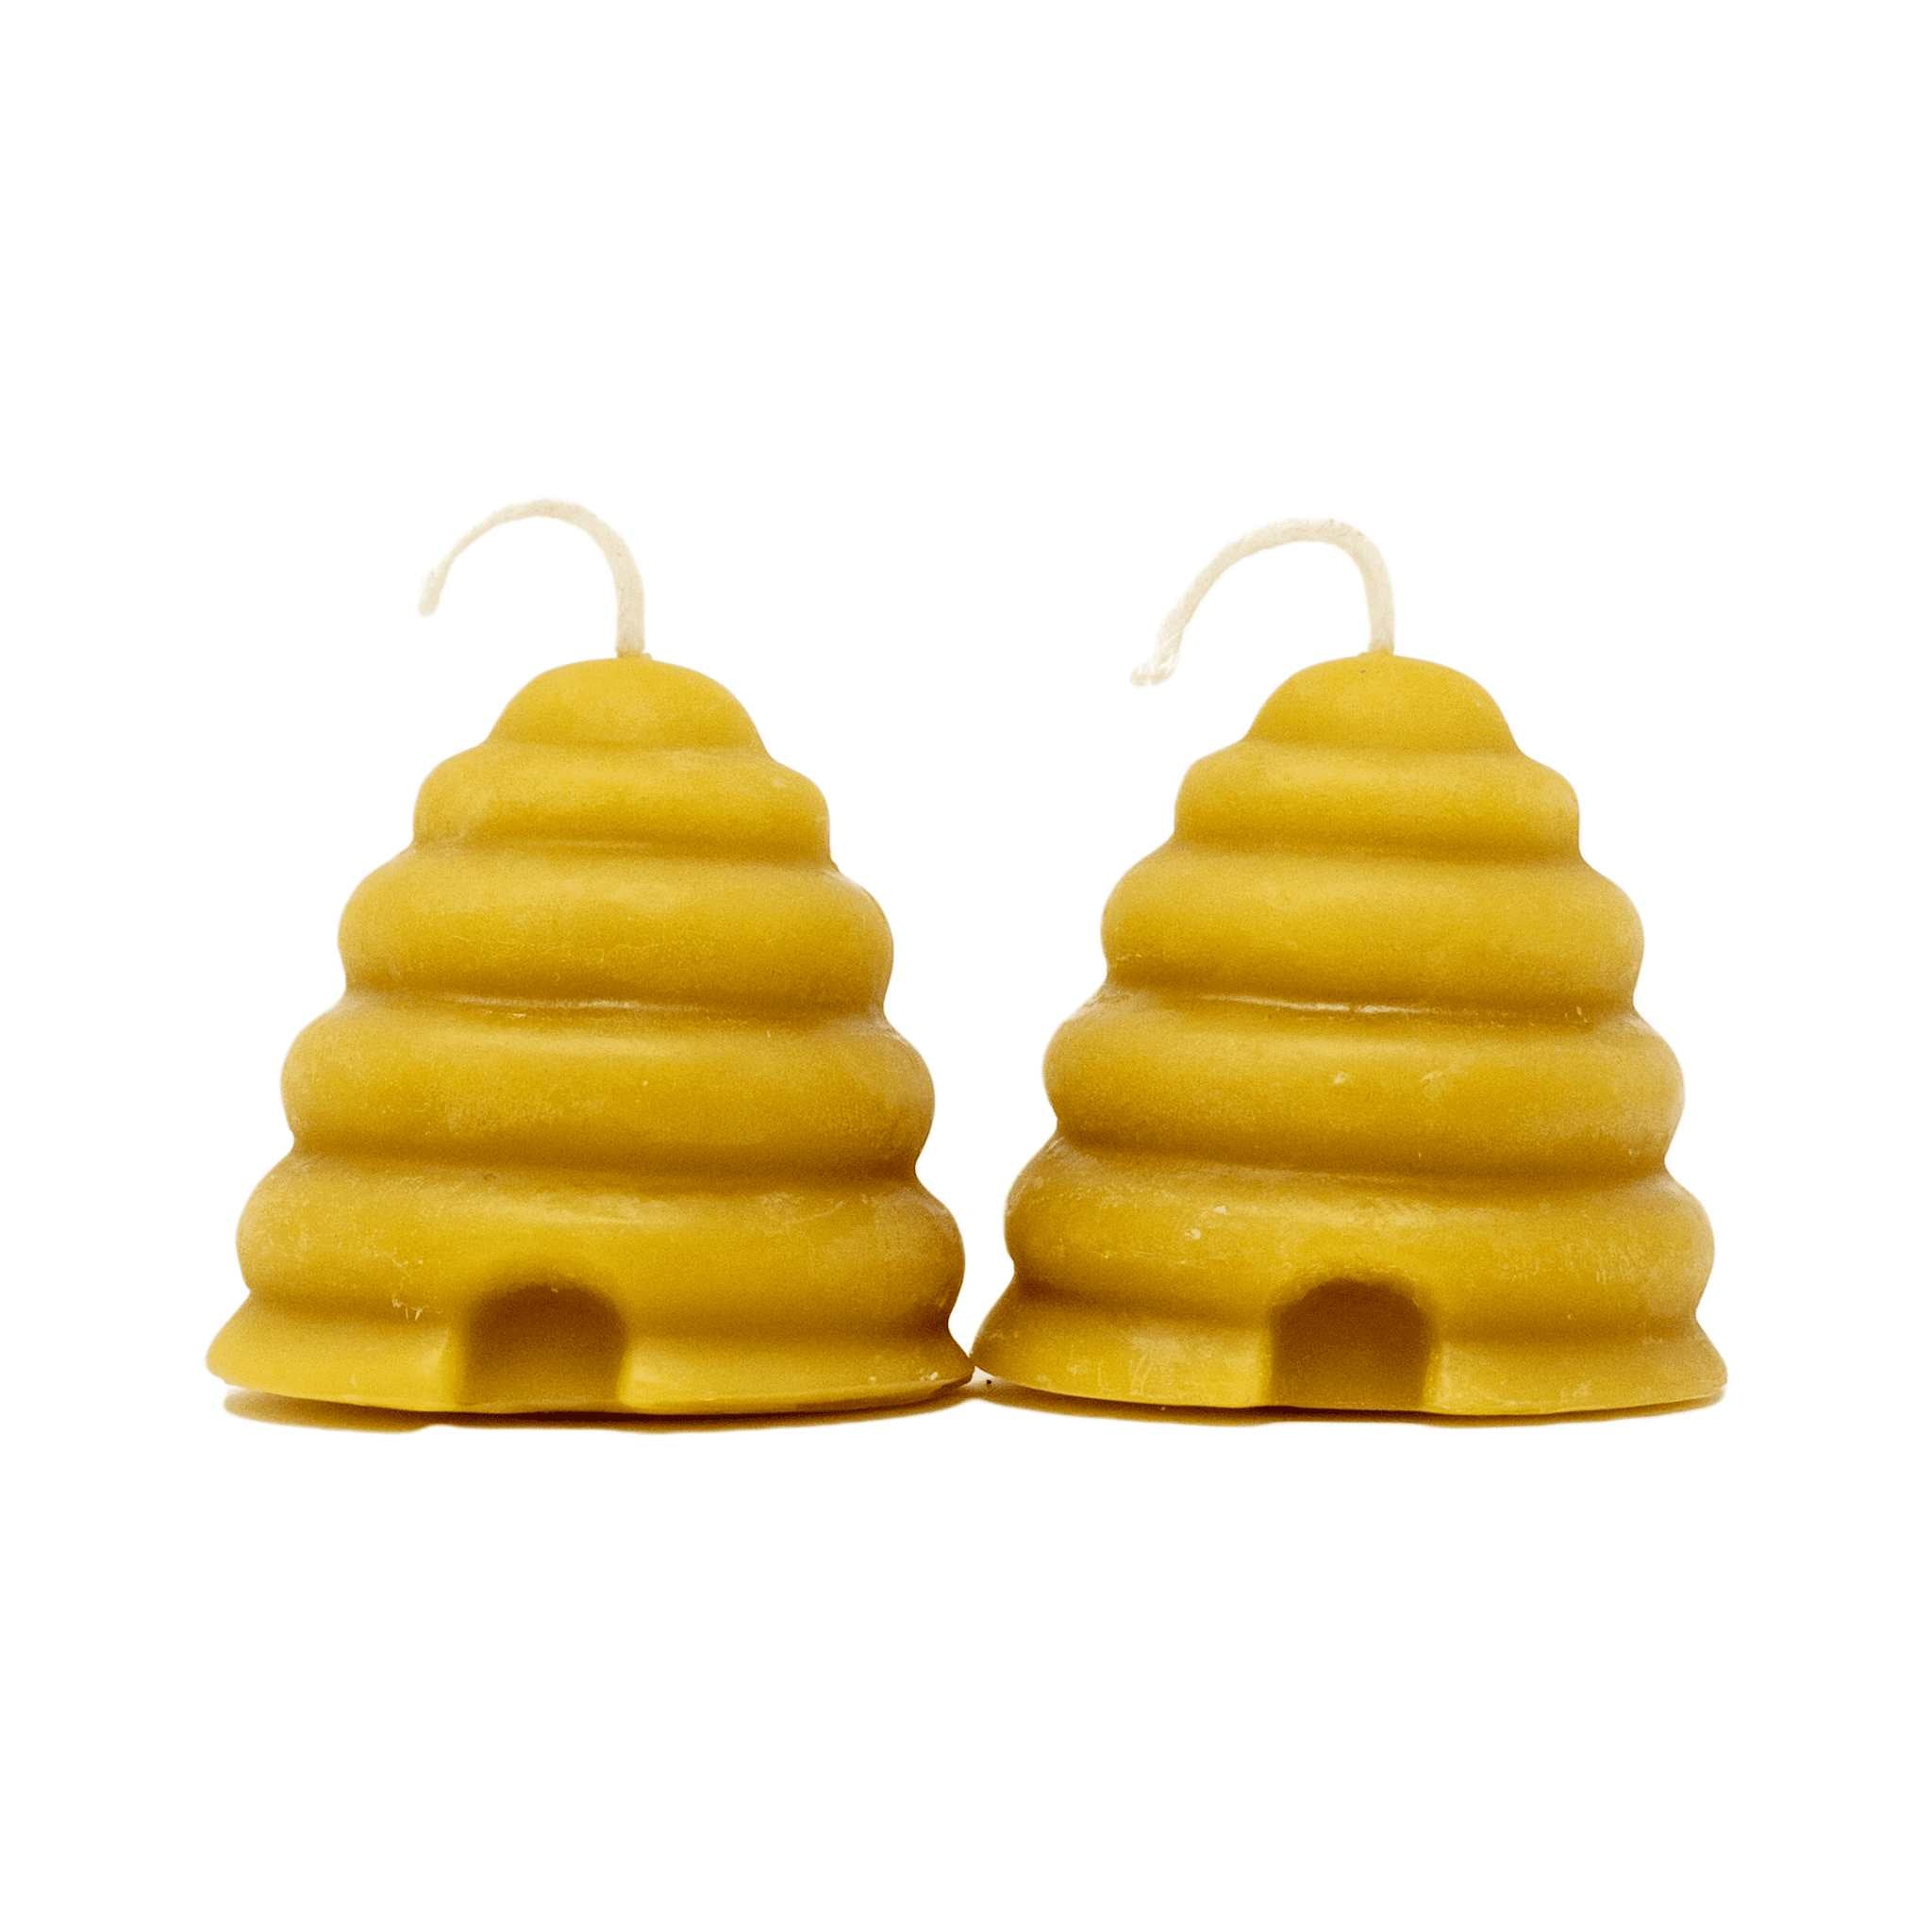  100% Pure Beeswax Mini Skep Votive Candles Set of 2 Sister Bees Perfumarie